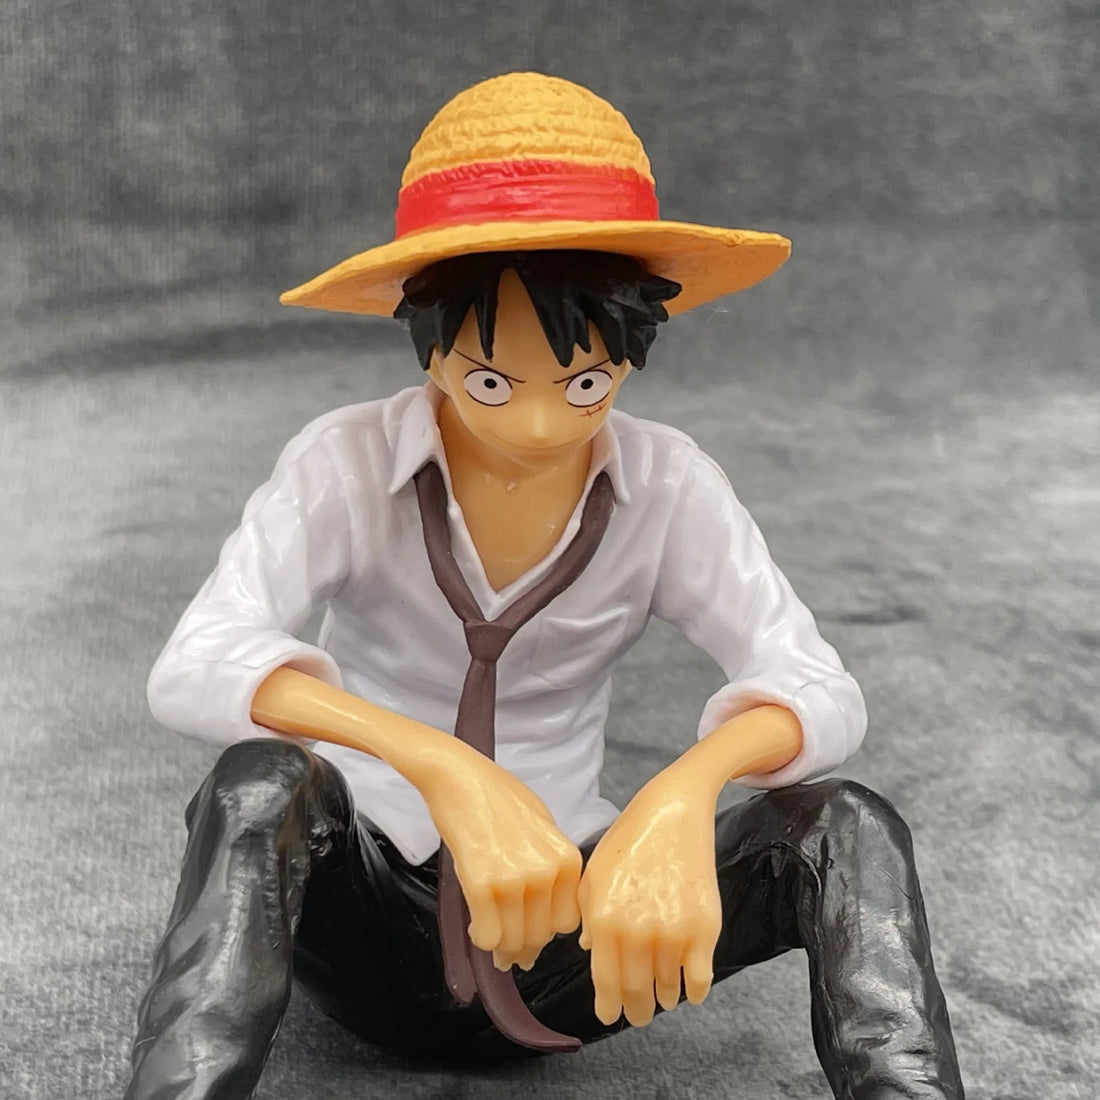 12CM Anime One Piece Monkey D Luffy Action Figure PVC  Model Toys Doll Cake Car Decoration Collection Kid Toy Gift